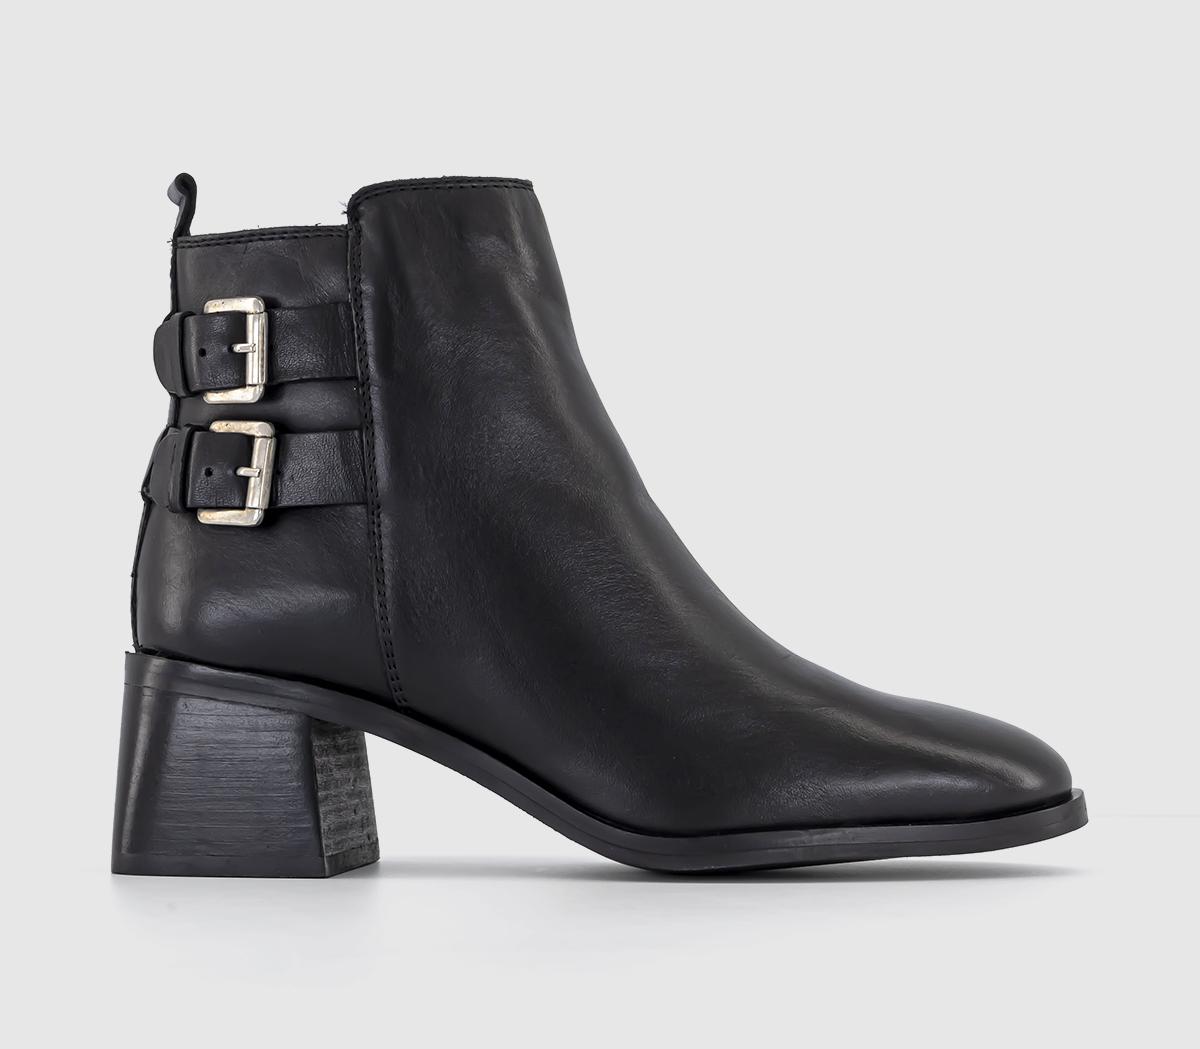 August Buckle Detail Block Heeled Boots Black Leather